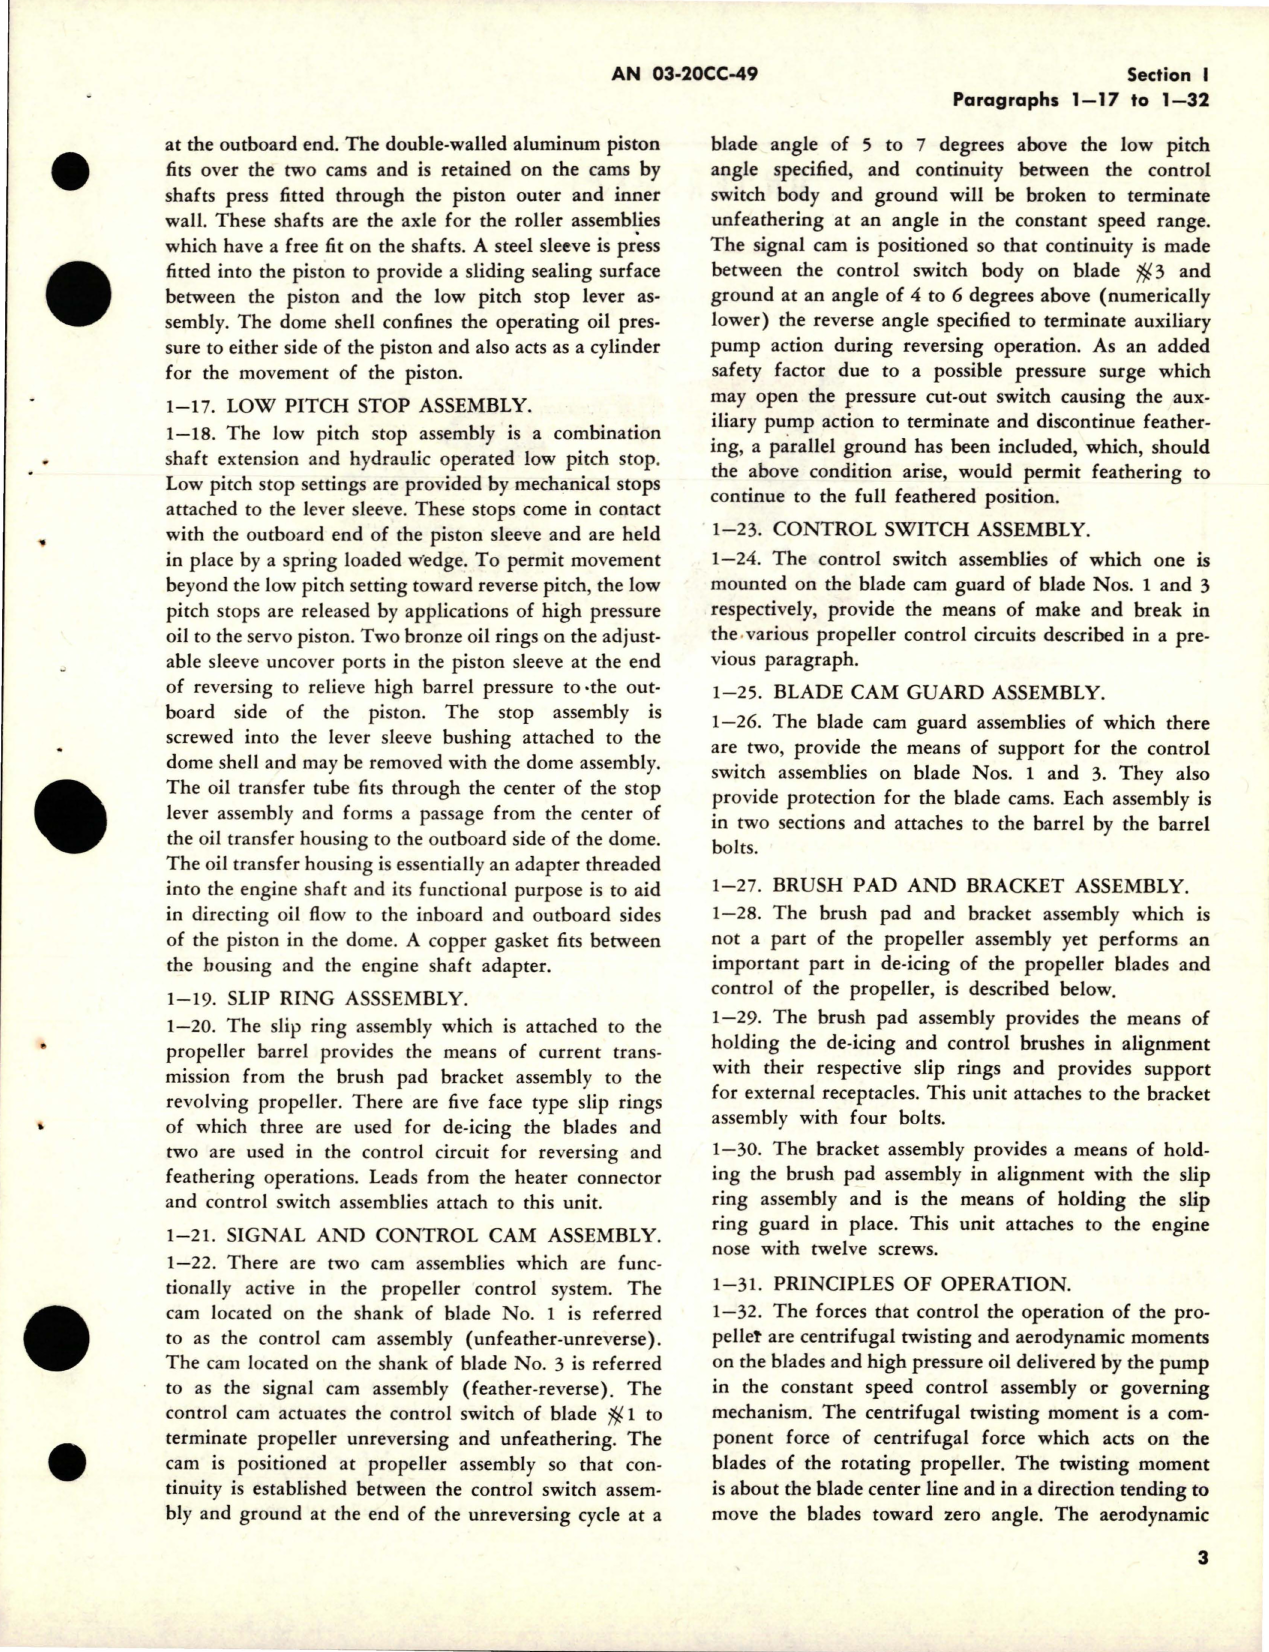 Sample page 7 from AirCorps Library document: Overhaul Instructions for Propeller Assembly - Model 34E60